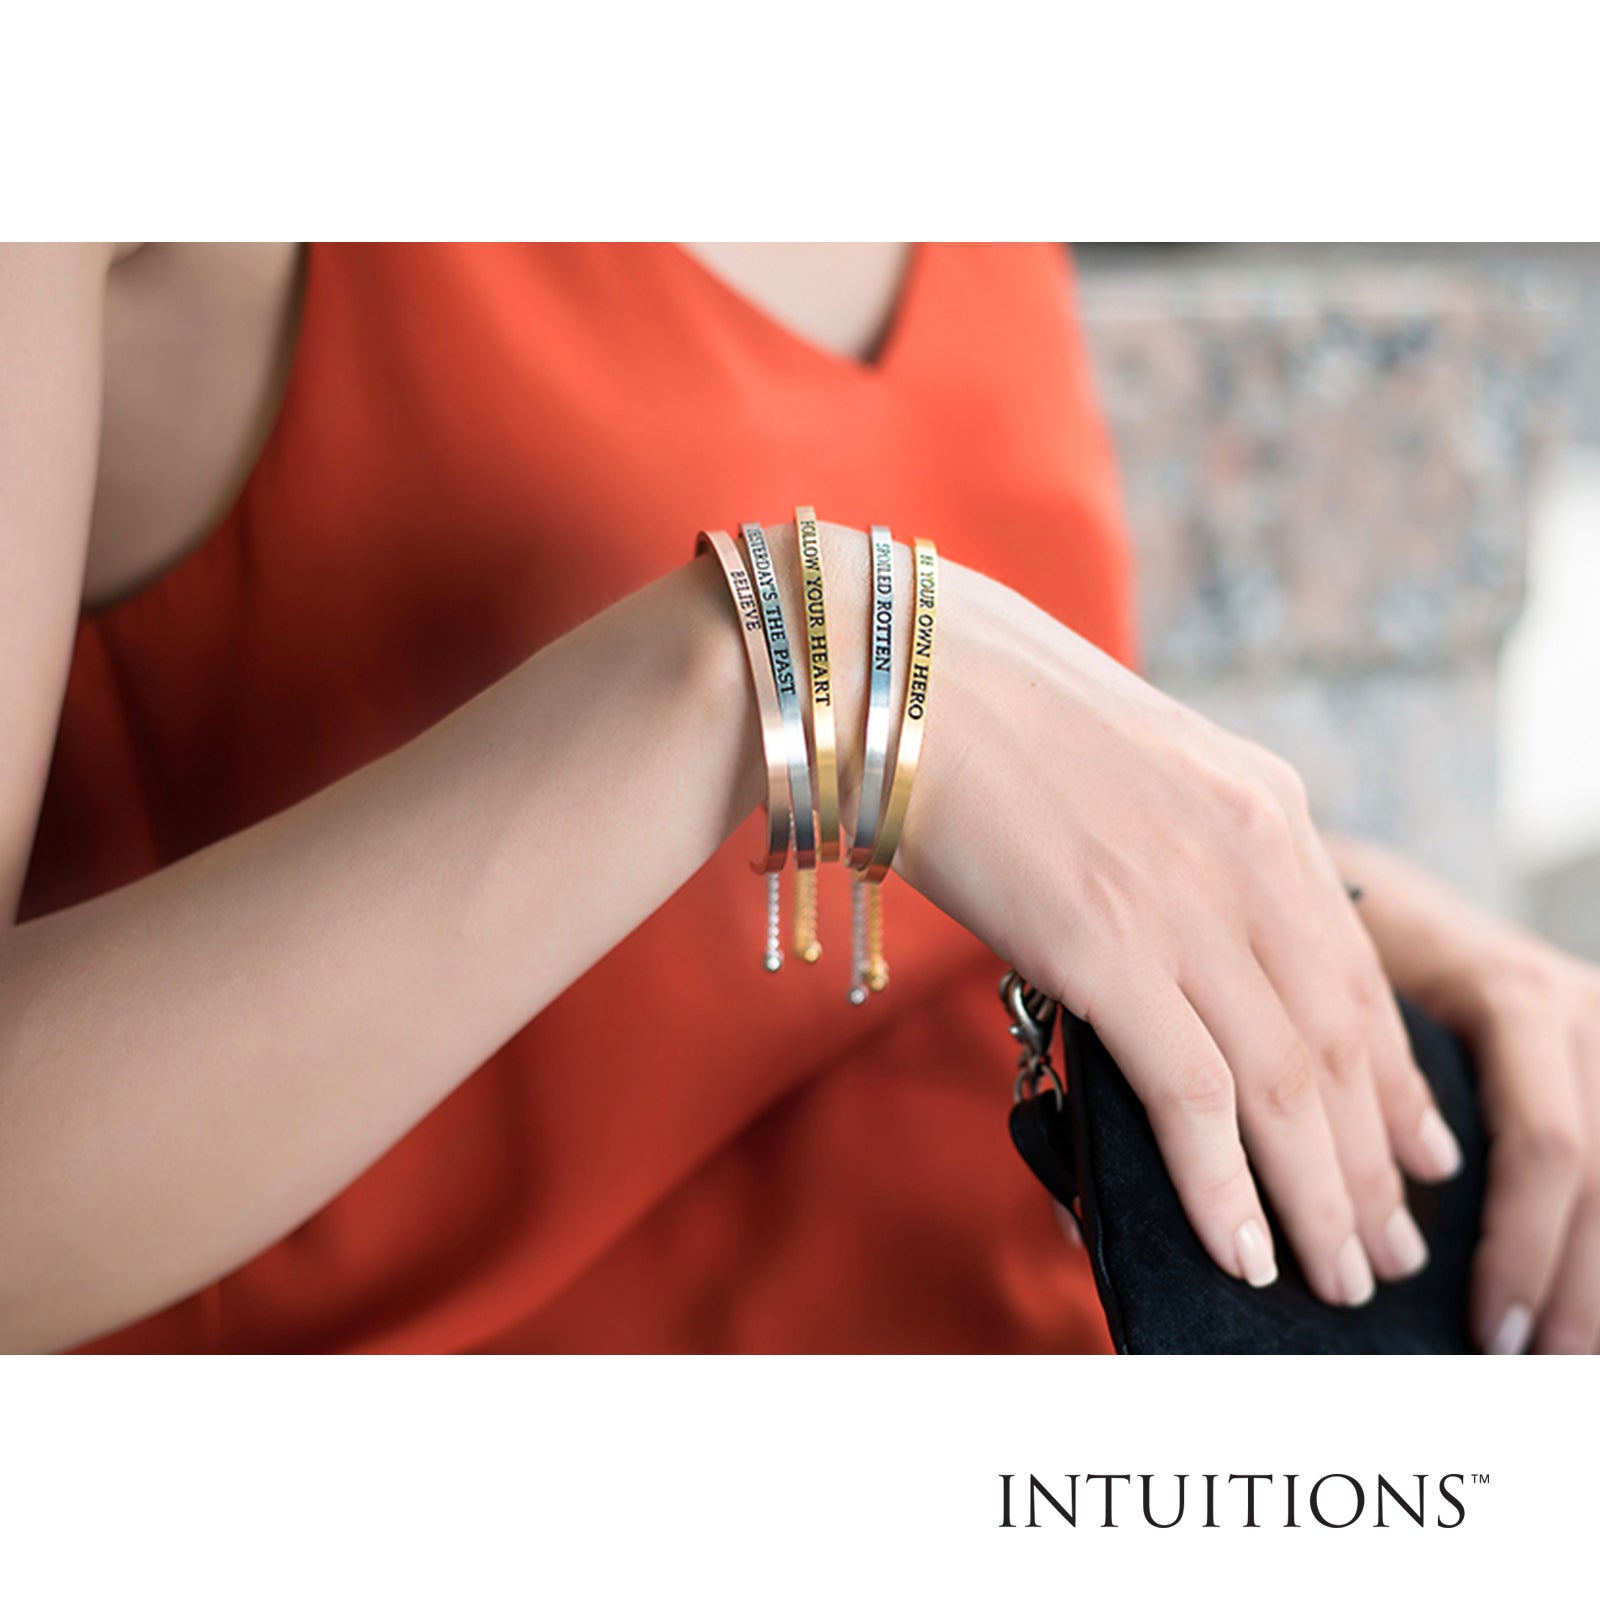 Intuitions Stainless Steel I TRUST MY S Diamond Accent Cuff Bangle Bracelet fine designer jewelry for men and women